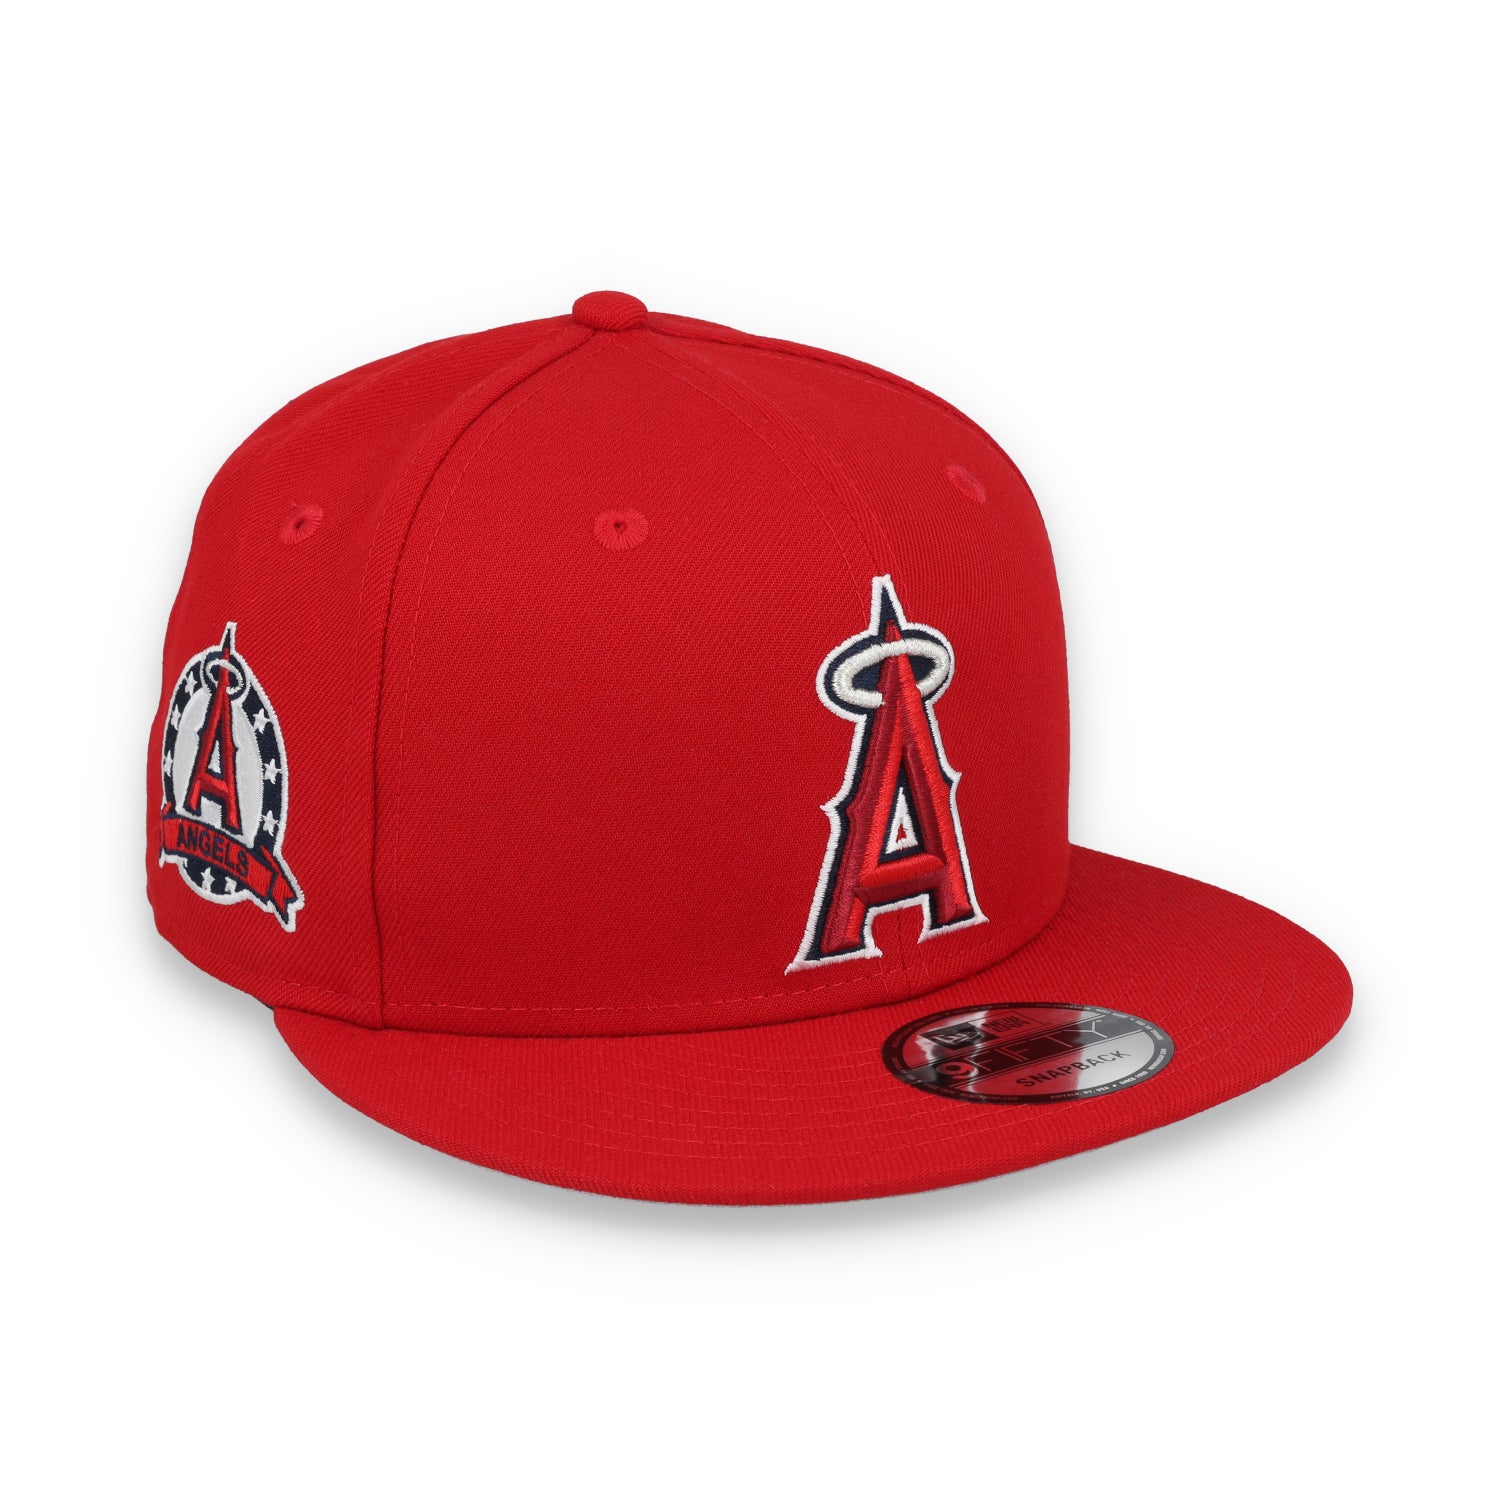 New Era Los Angeles Angels Patch E3 9FIFTY Snapback Hat